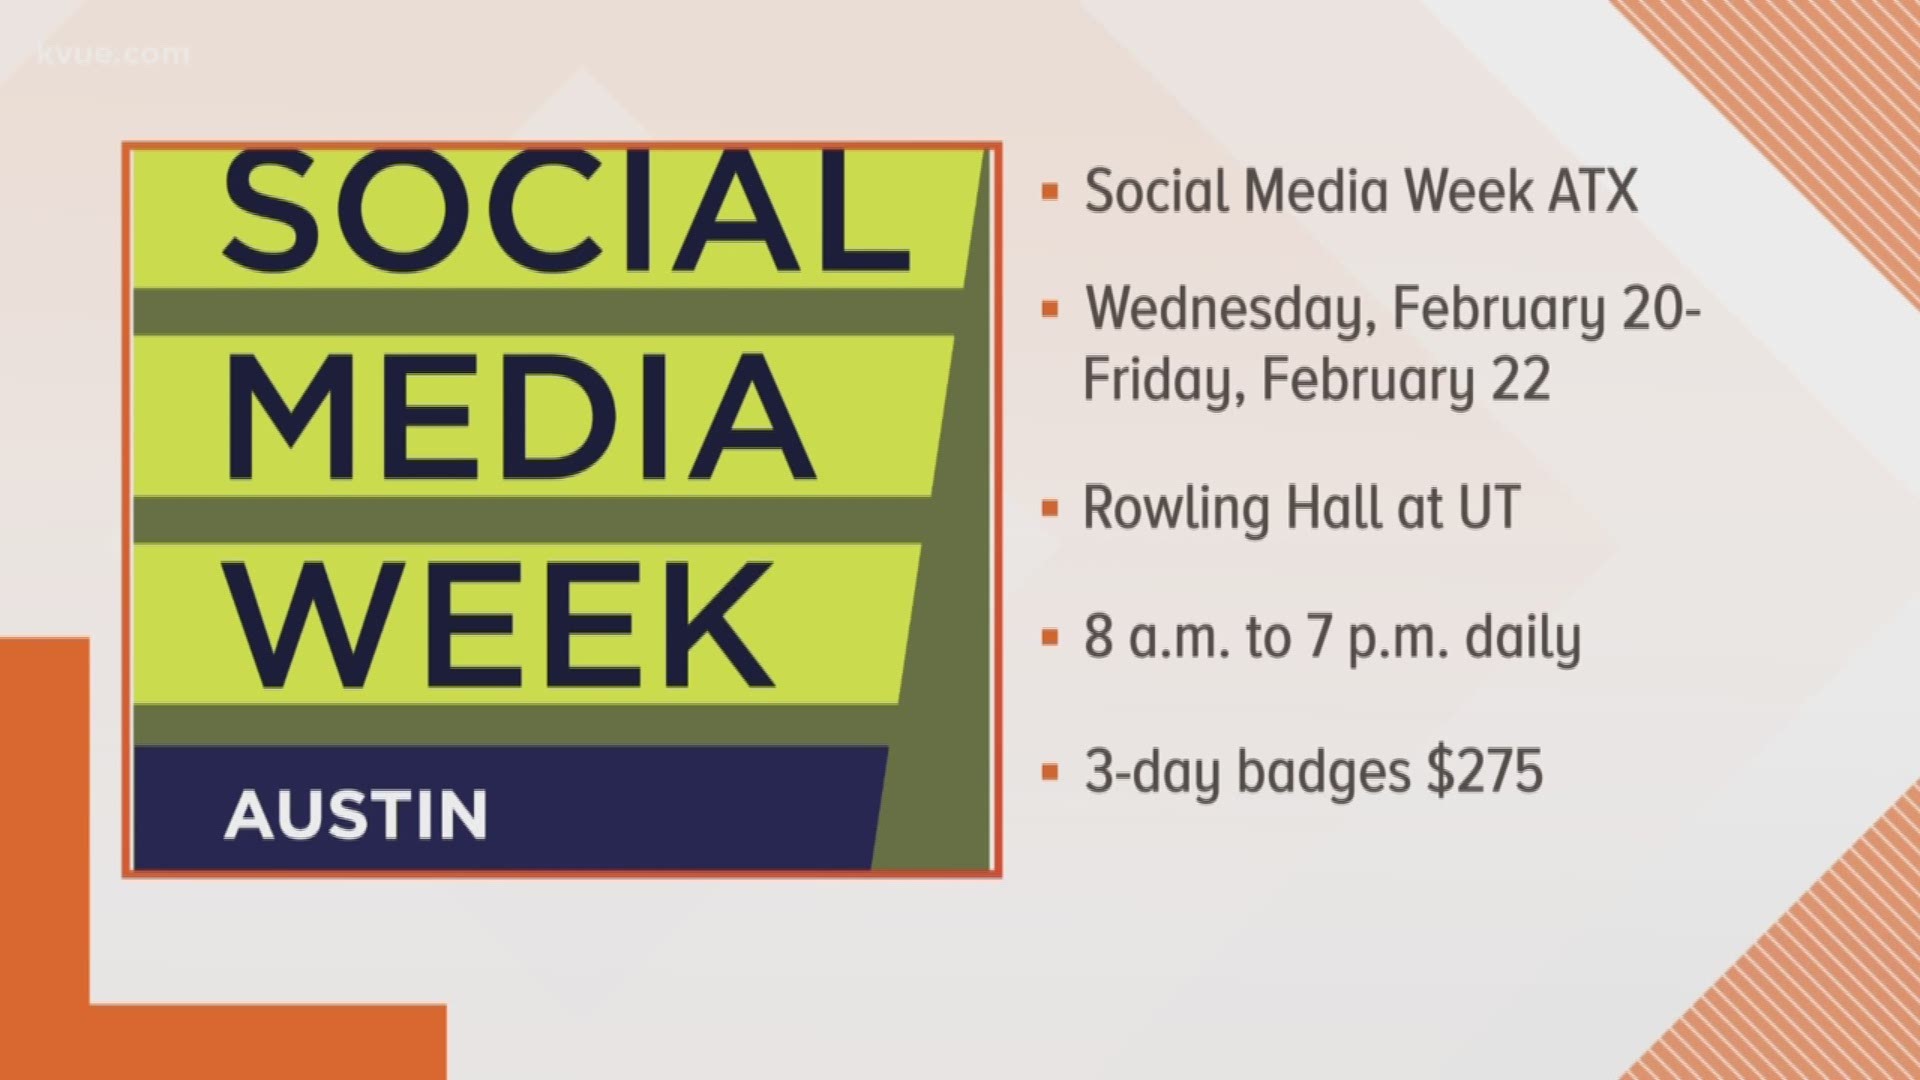 Whether you're wanting to enhance your digital marketing strategies or take a master class, this educational conference is here to let you know about all things social media.